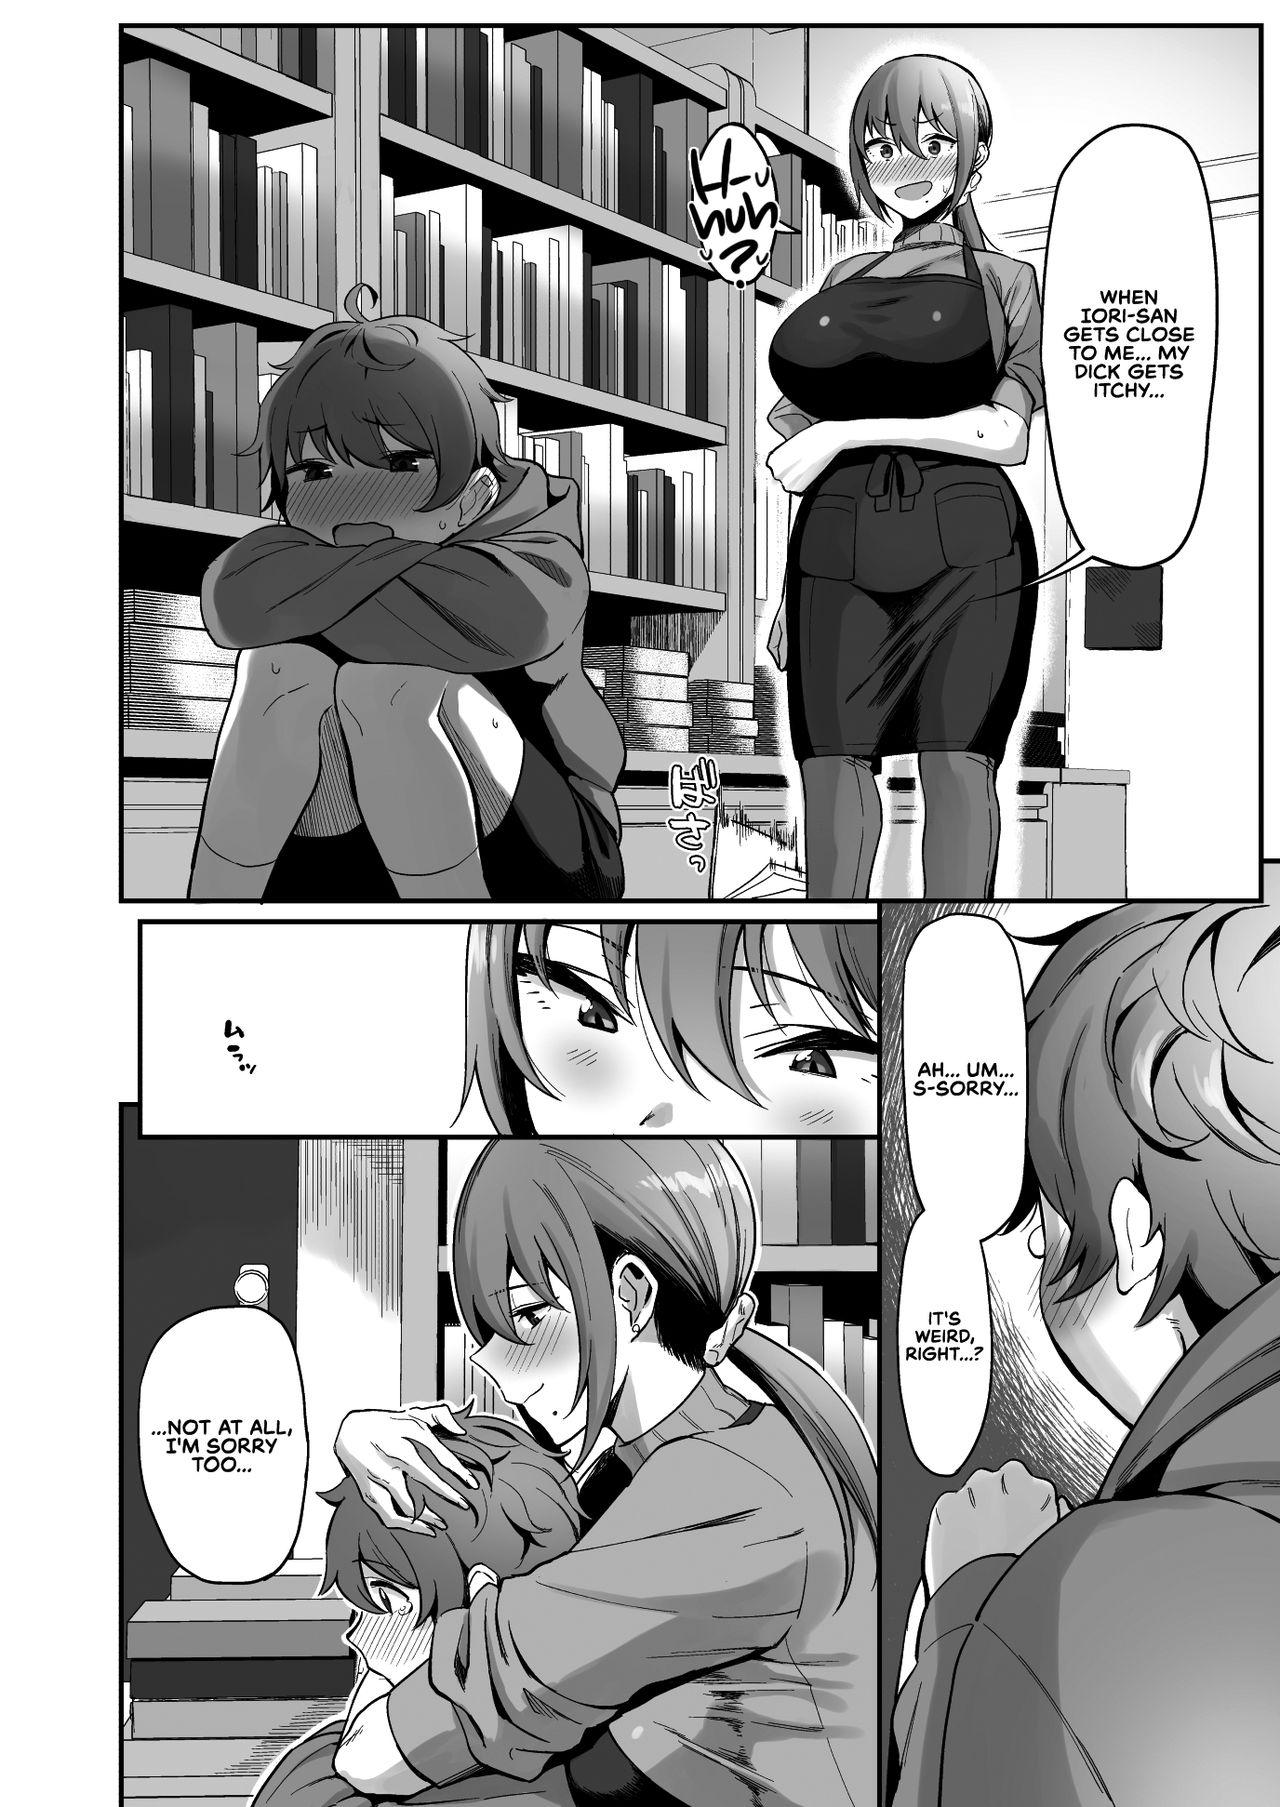 Spy Camera Furuhonya no Onee-san to | With The Lady From The Used Book Shop - Original Big Cock - Page 9